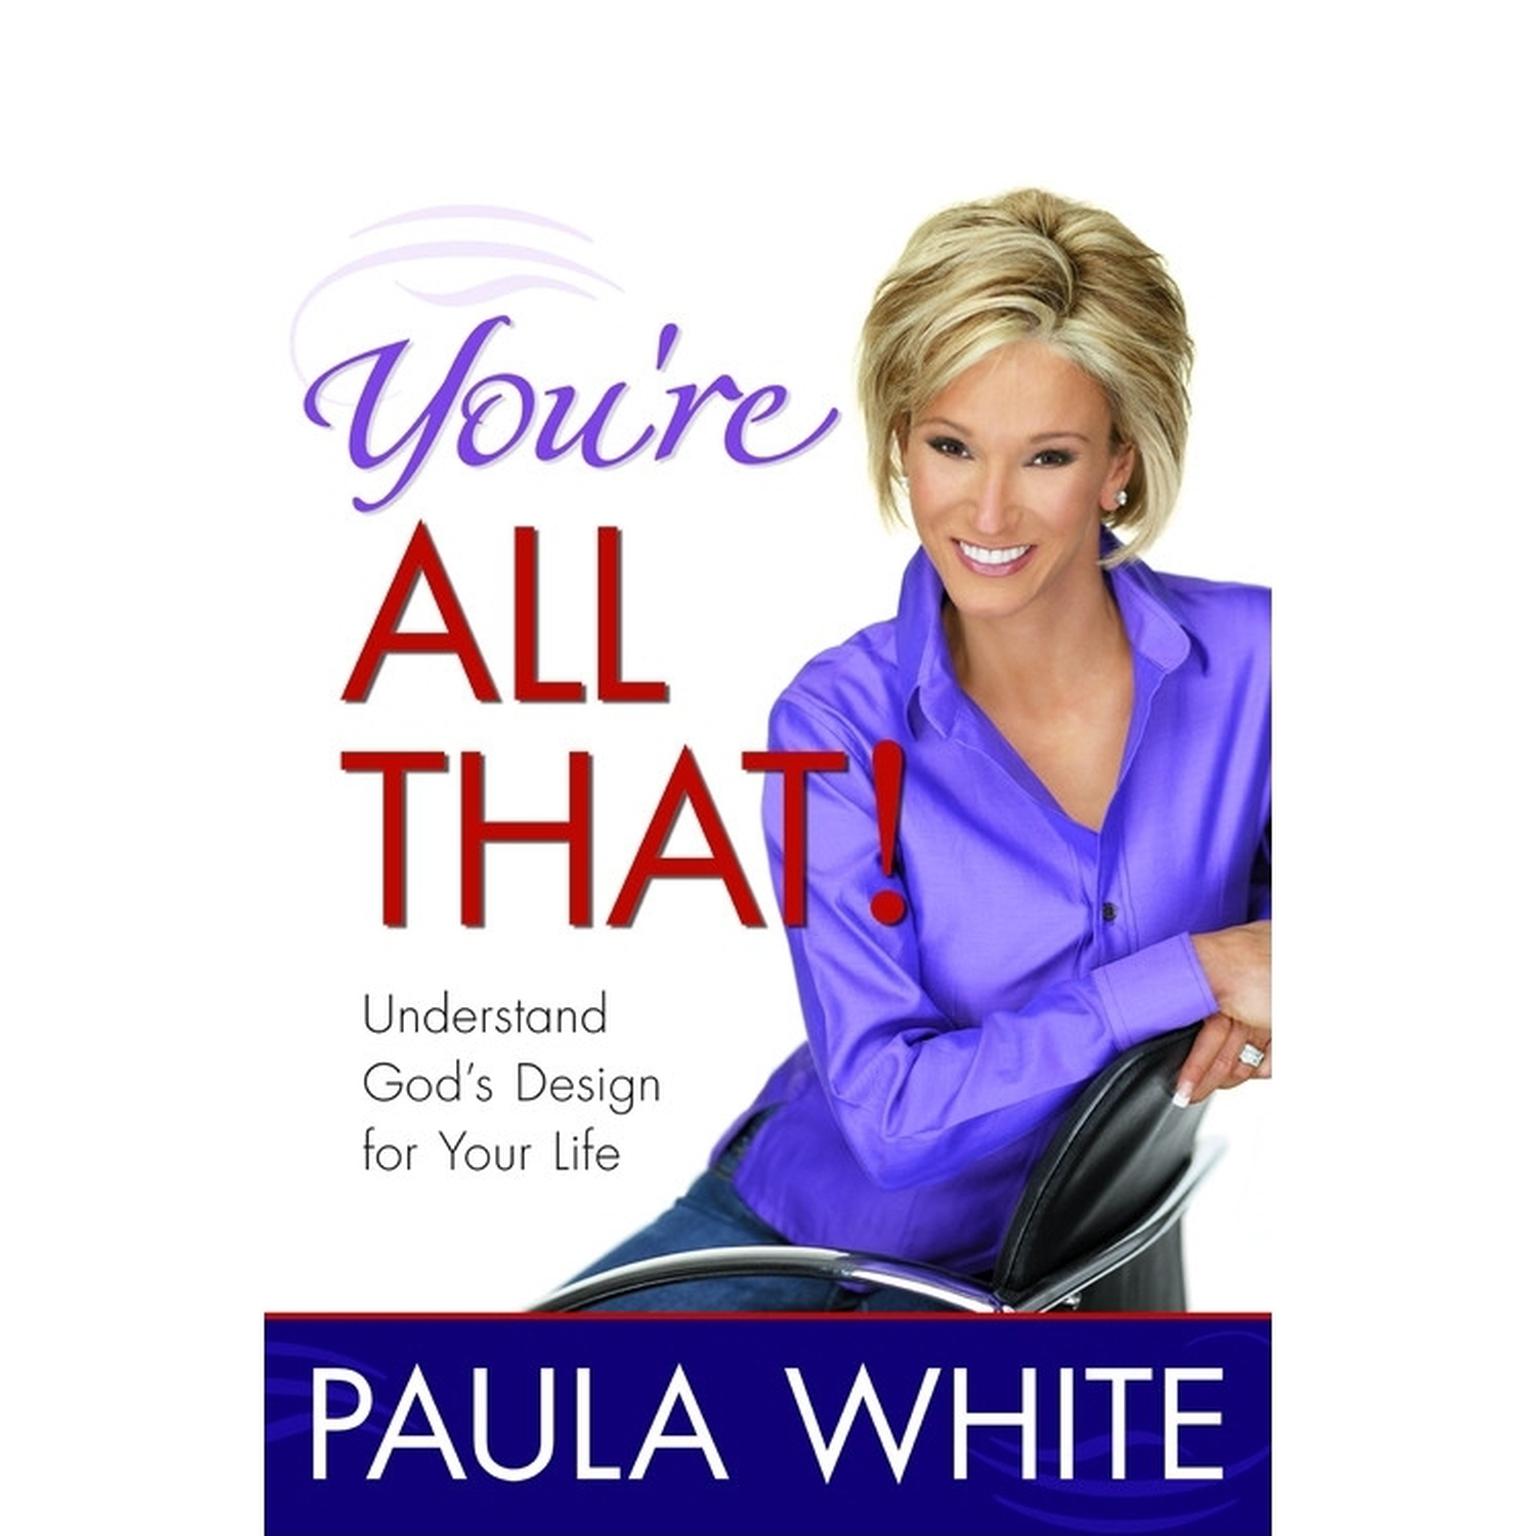 Youre All That! (Abridged): Understand Gods Design for Your Life Audiobook, by Paula White